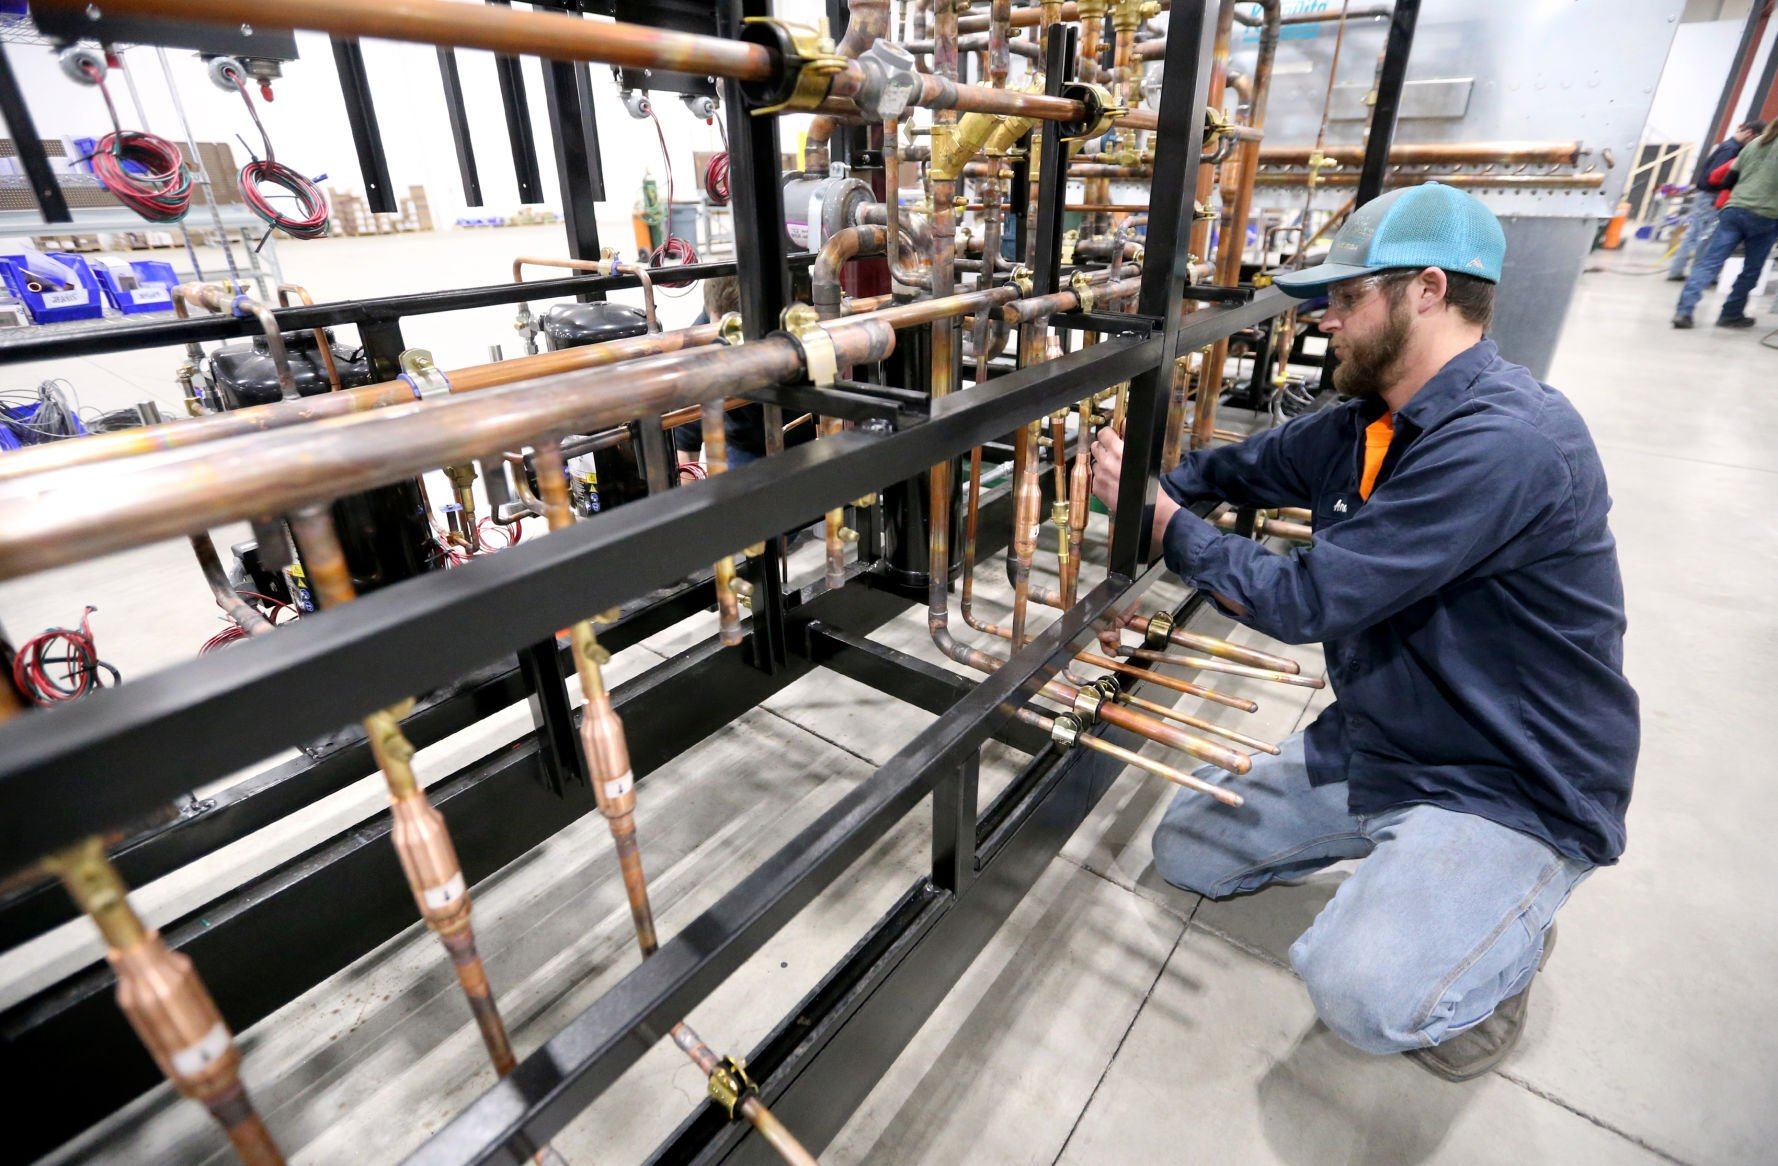 Andrew Bacon works on a pipe for an industrial refrigeration unit at Zero Zone in Dyersville, Iowa, on Thursday, May 5, 2022.    PHOTO CREDIT: JESSICA REILLY